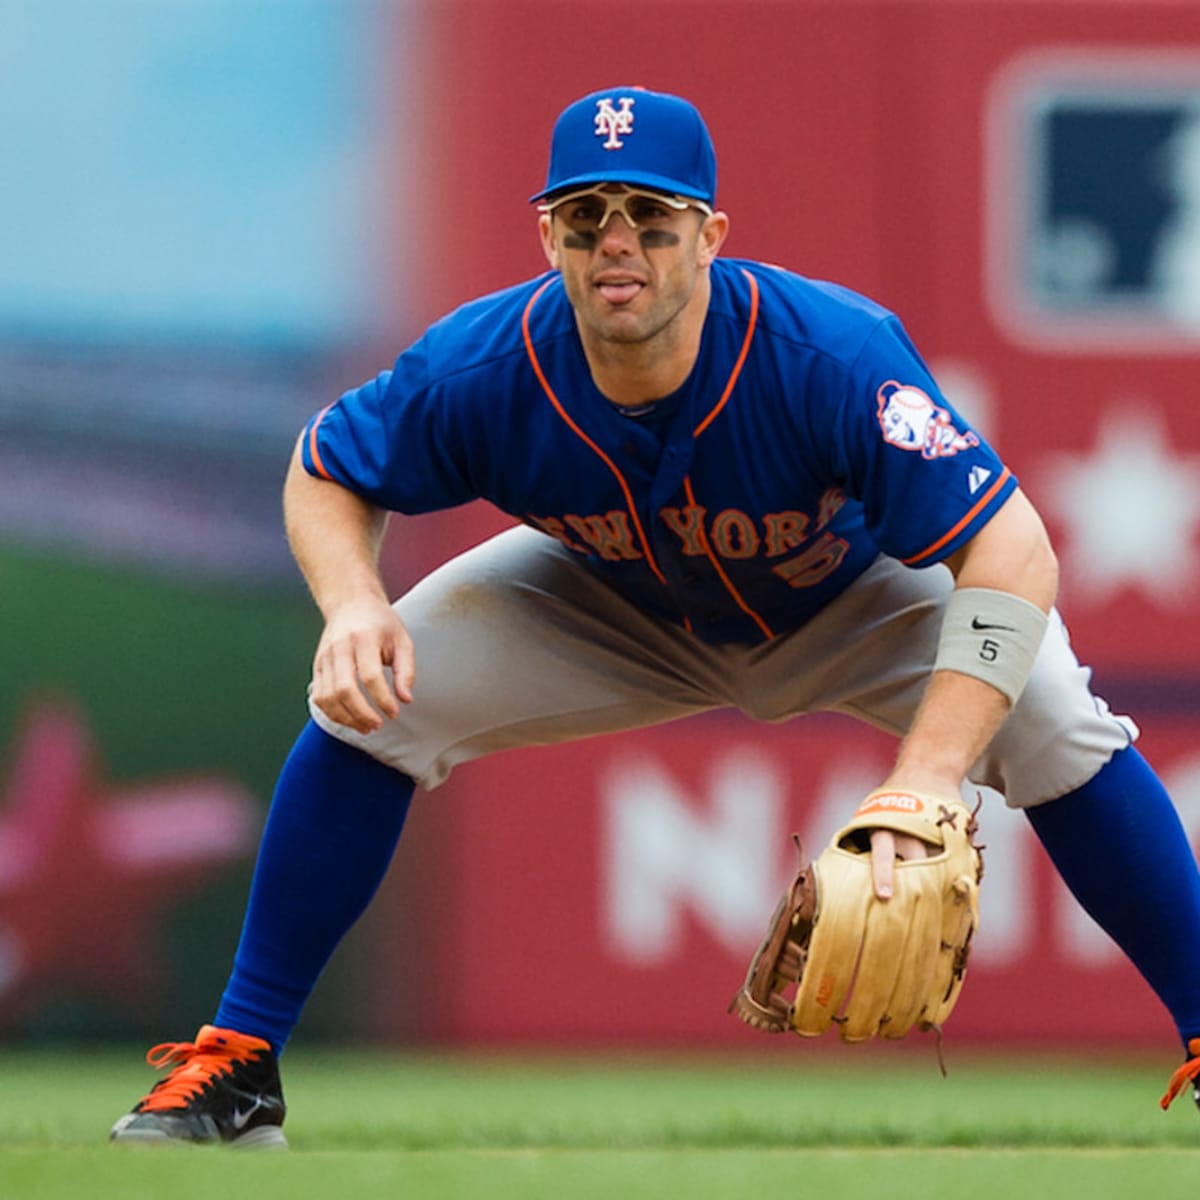 The Mets' David Wright jersey giveaway has a depressing sponsor